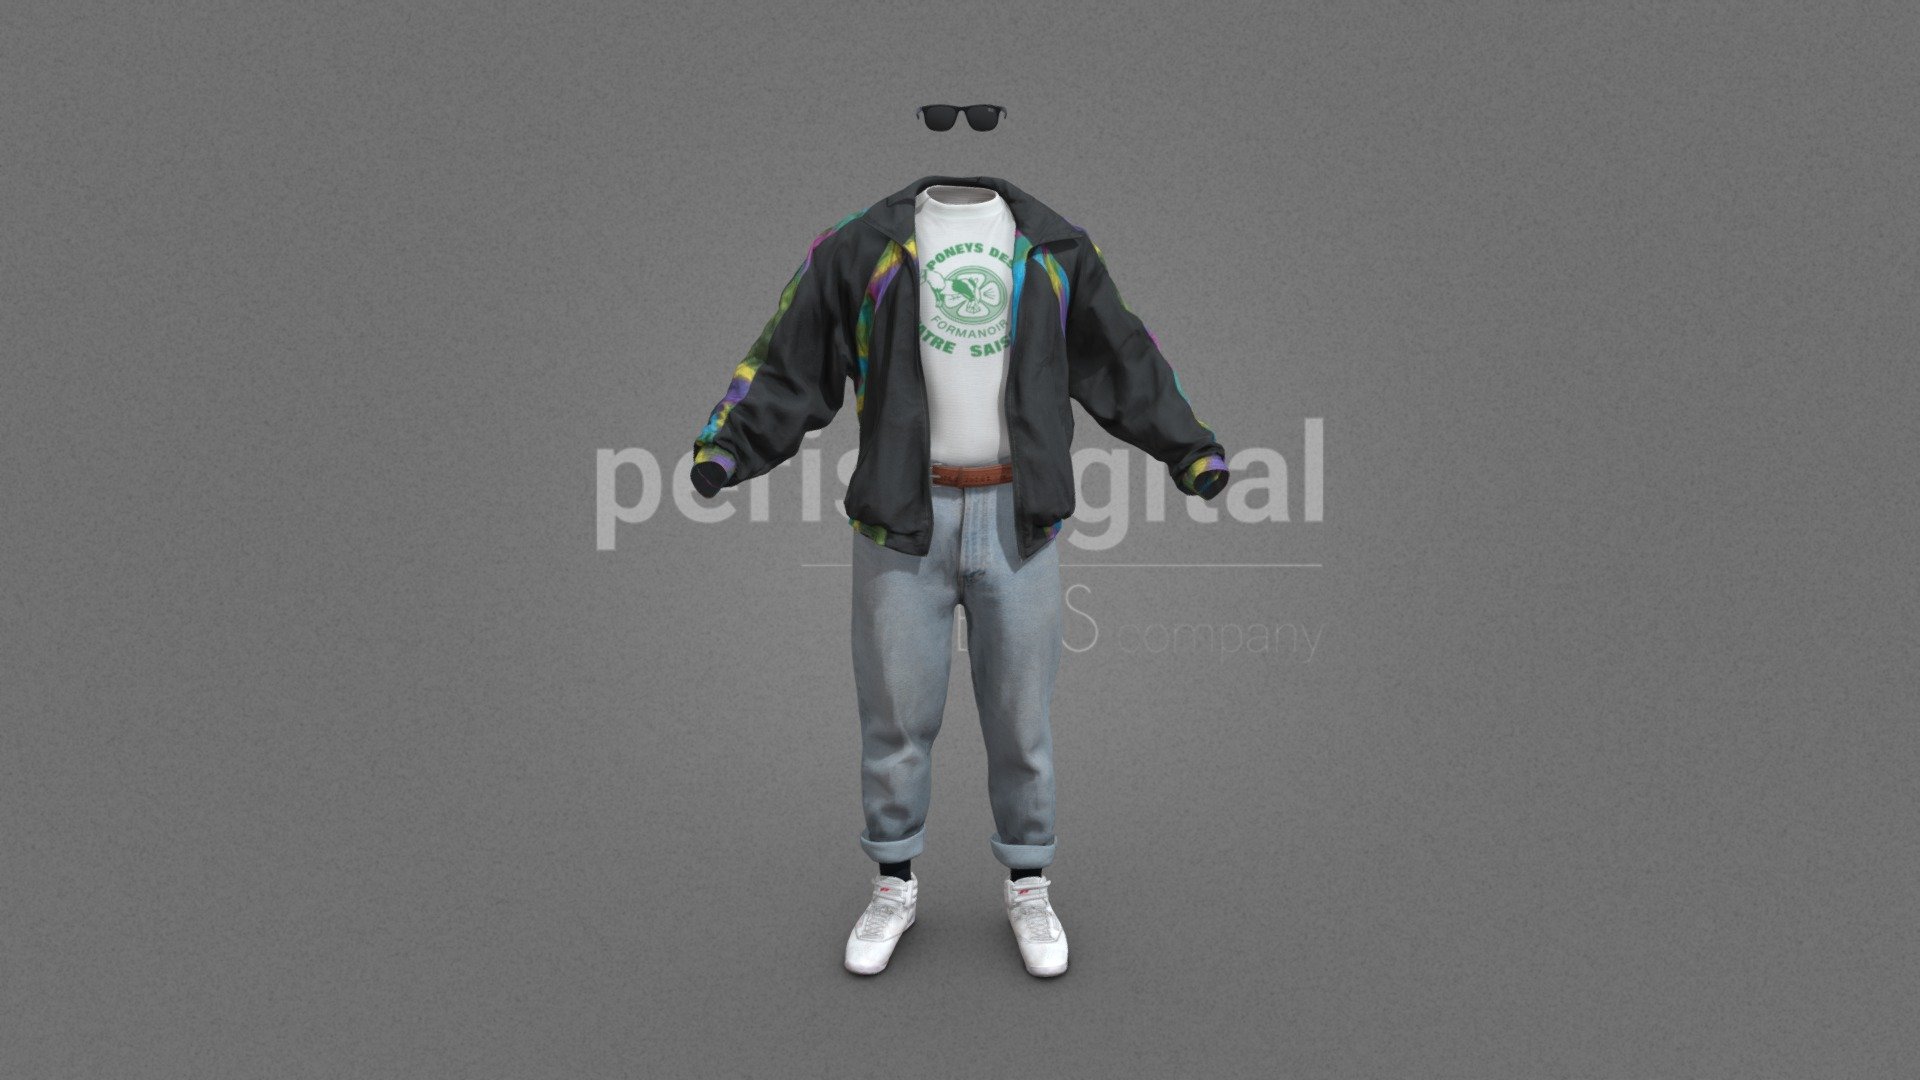 Black sport sweatshirt with multicolored stripes, white short sleeve T-shirt with green lettering, light blue straight jeans, brown leather belt with silver buckle, white rebook sneakers, black square ray-ban sunglasses

They are optimized for use in 3D scenes of medium/high polygonalization and optimized for rendering.

We do not include characters, but they are positioned for you to include and adjust your own character.

They have a model LOW (_LODRIG) inside the Blender file (included in the AdditionalFiles), which you can use for vertex weighting or cloth simulation and thus, make the transfer of vertices or property masks from the LOW to the HIGH** model.

**We have included the texture maps in high resolution, so you can make extreme point of view with your 3D cameras, as well as the Blender file so you can edit any aspect of the set.

Enjoy it.

Web: https://peris.digital/ - 80s Fashion Series - Man 03 - 3D model by Peris Digital (@perisdigital) 3d model